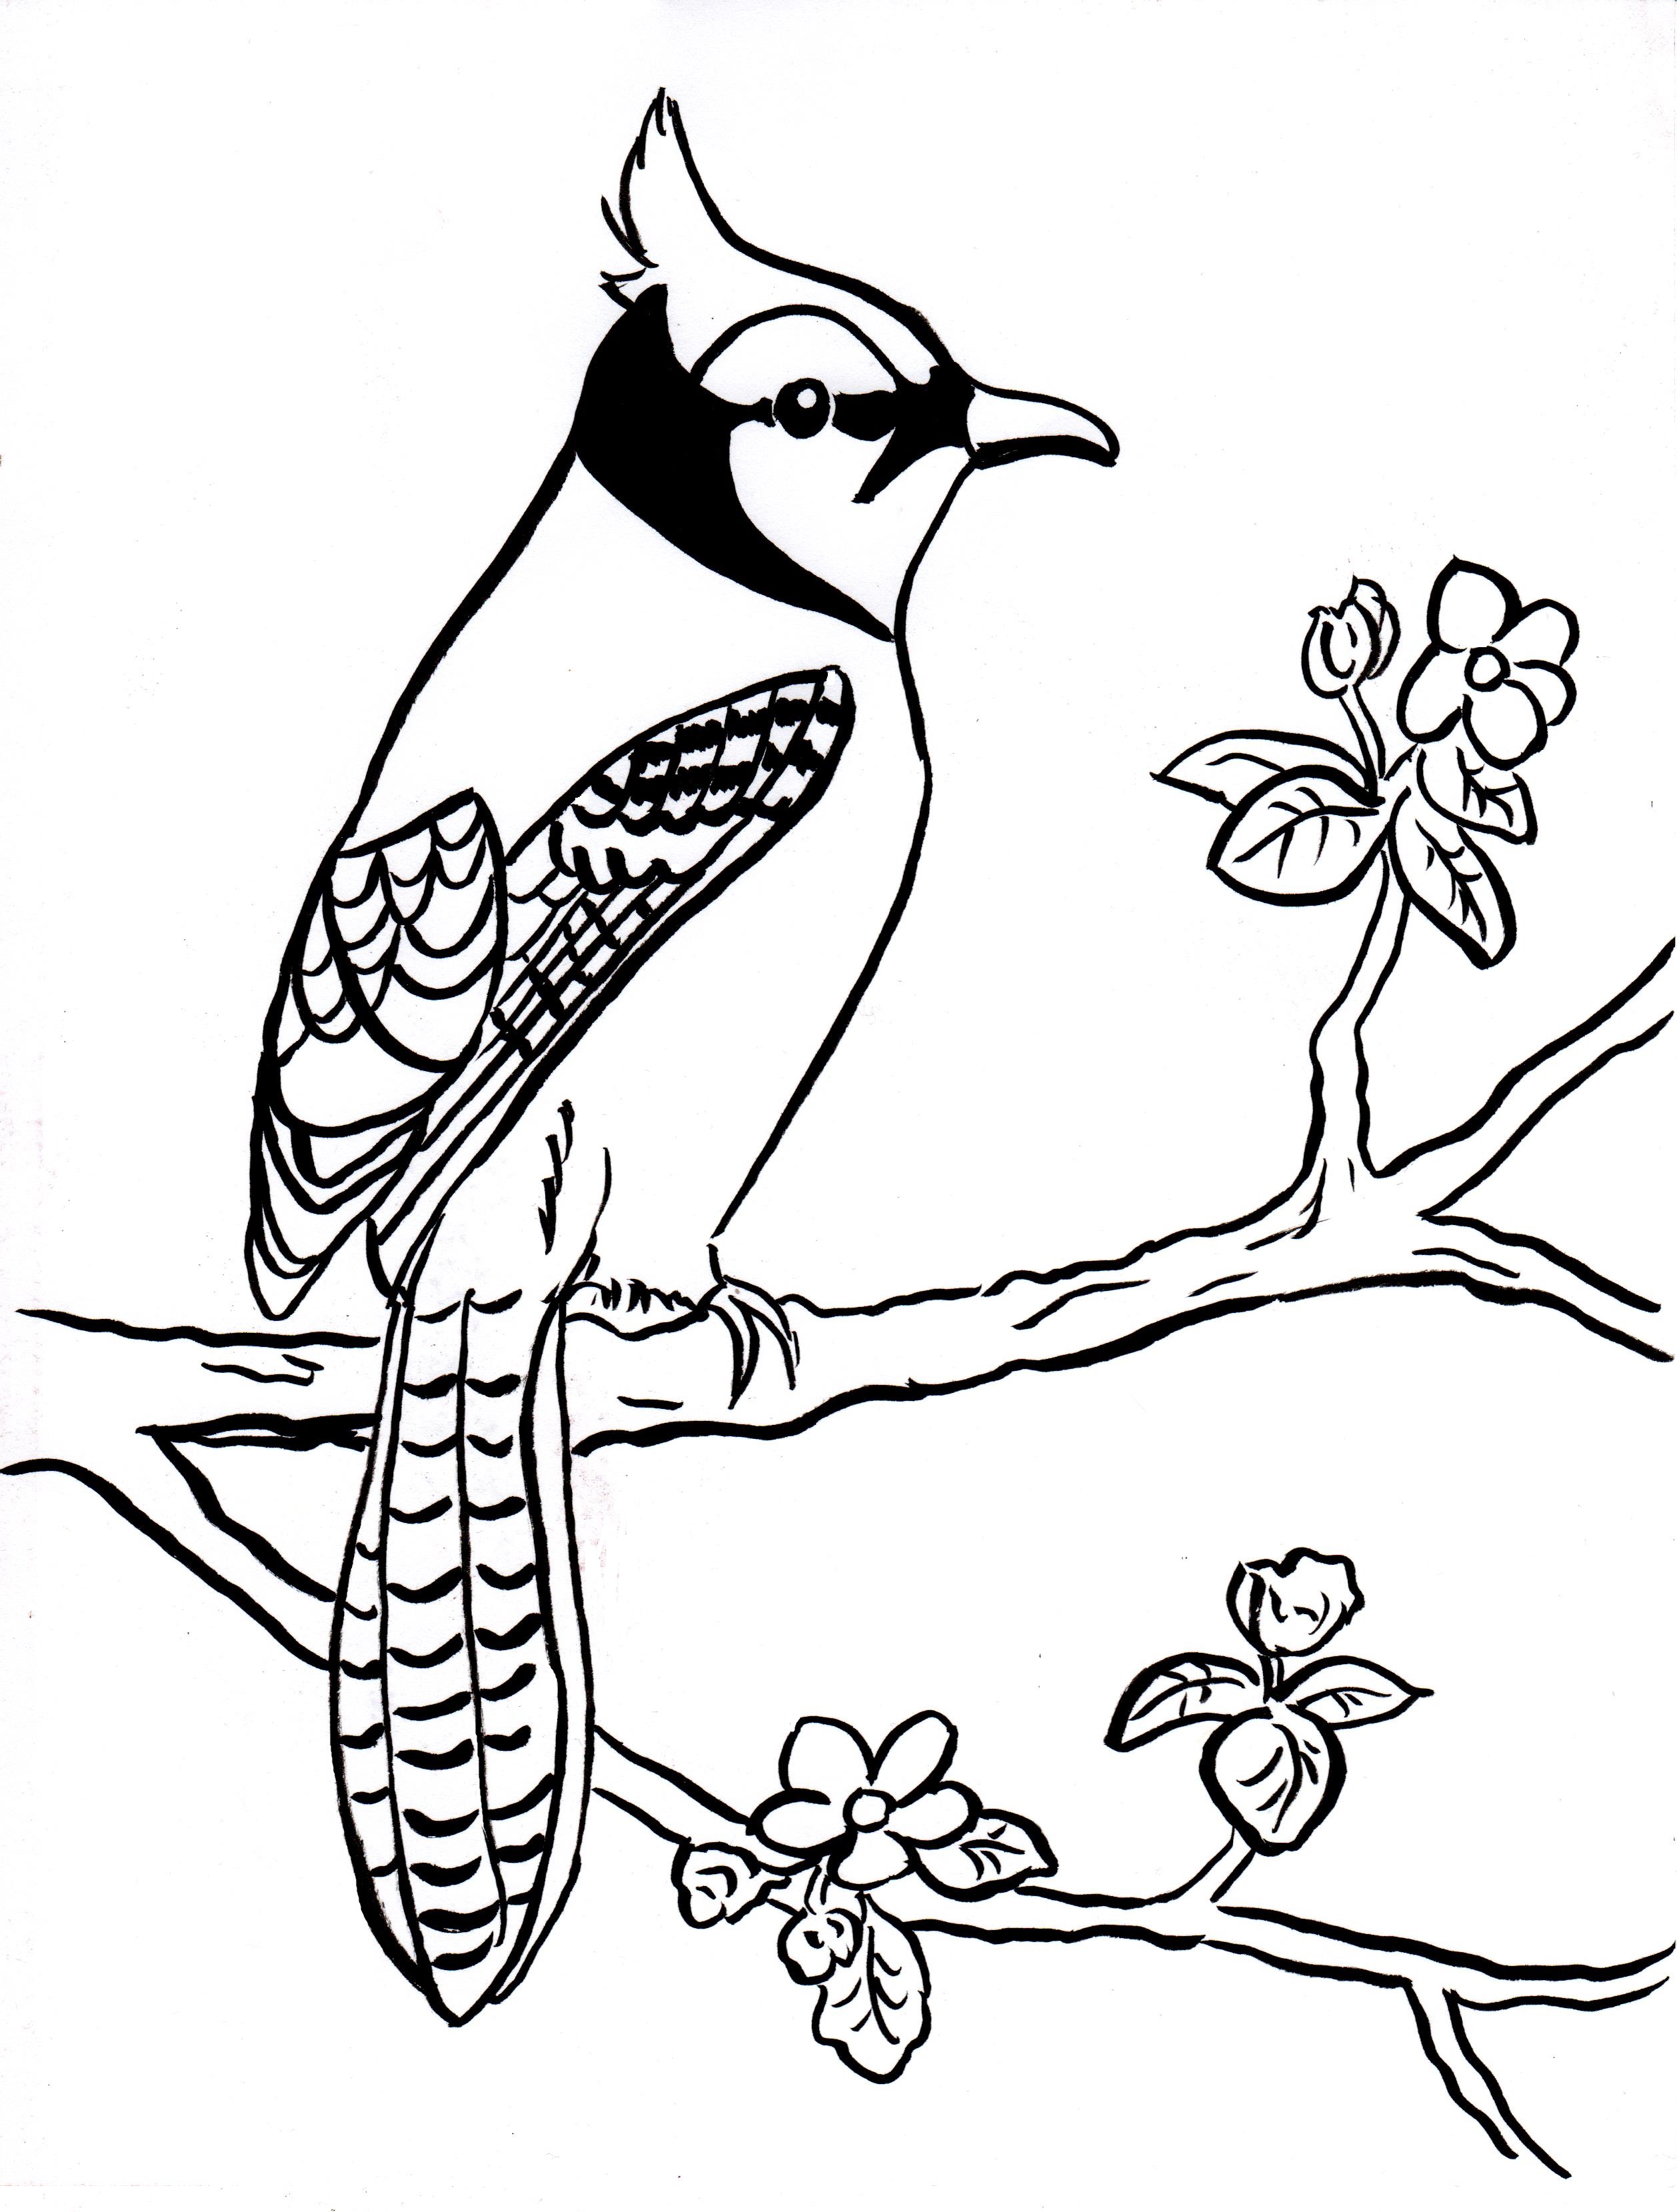 Blue Jay Coloring Page Art Starts For Kids